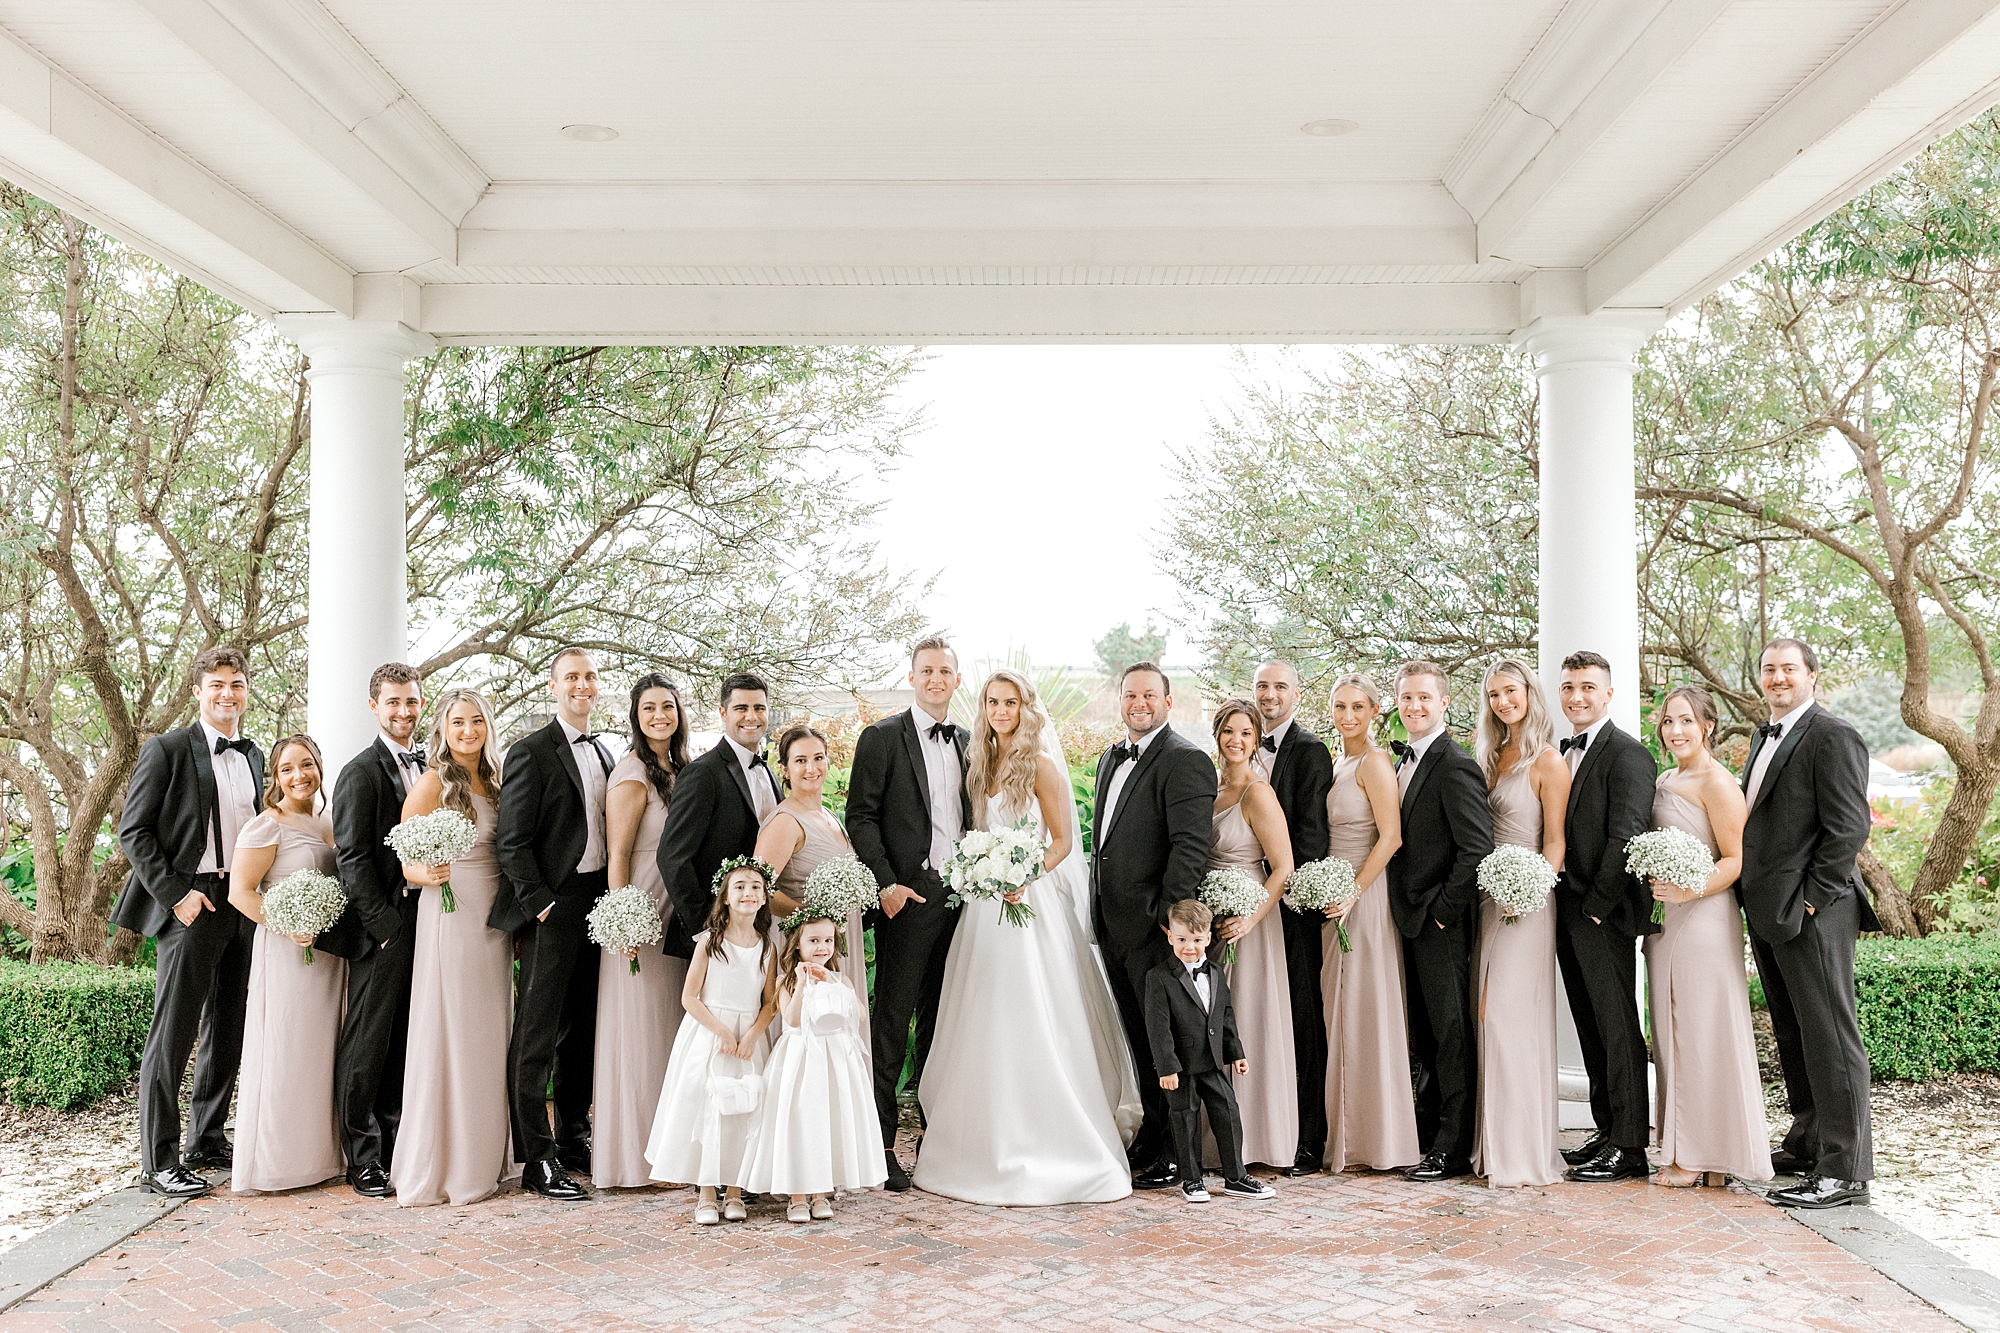 newlyweds pose with wedding party in pink and black around them